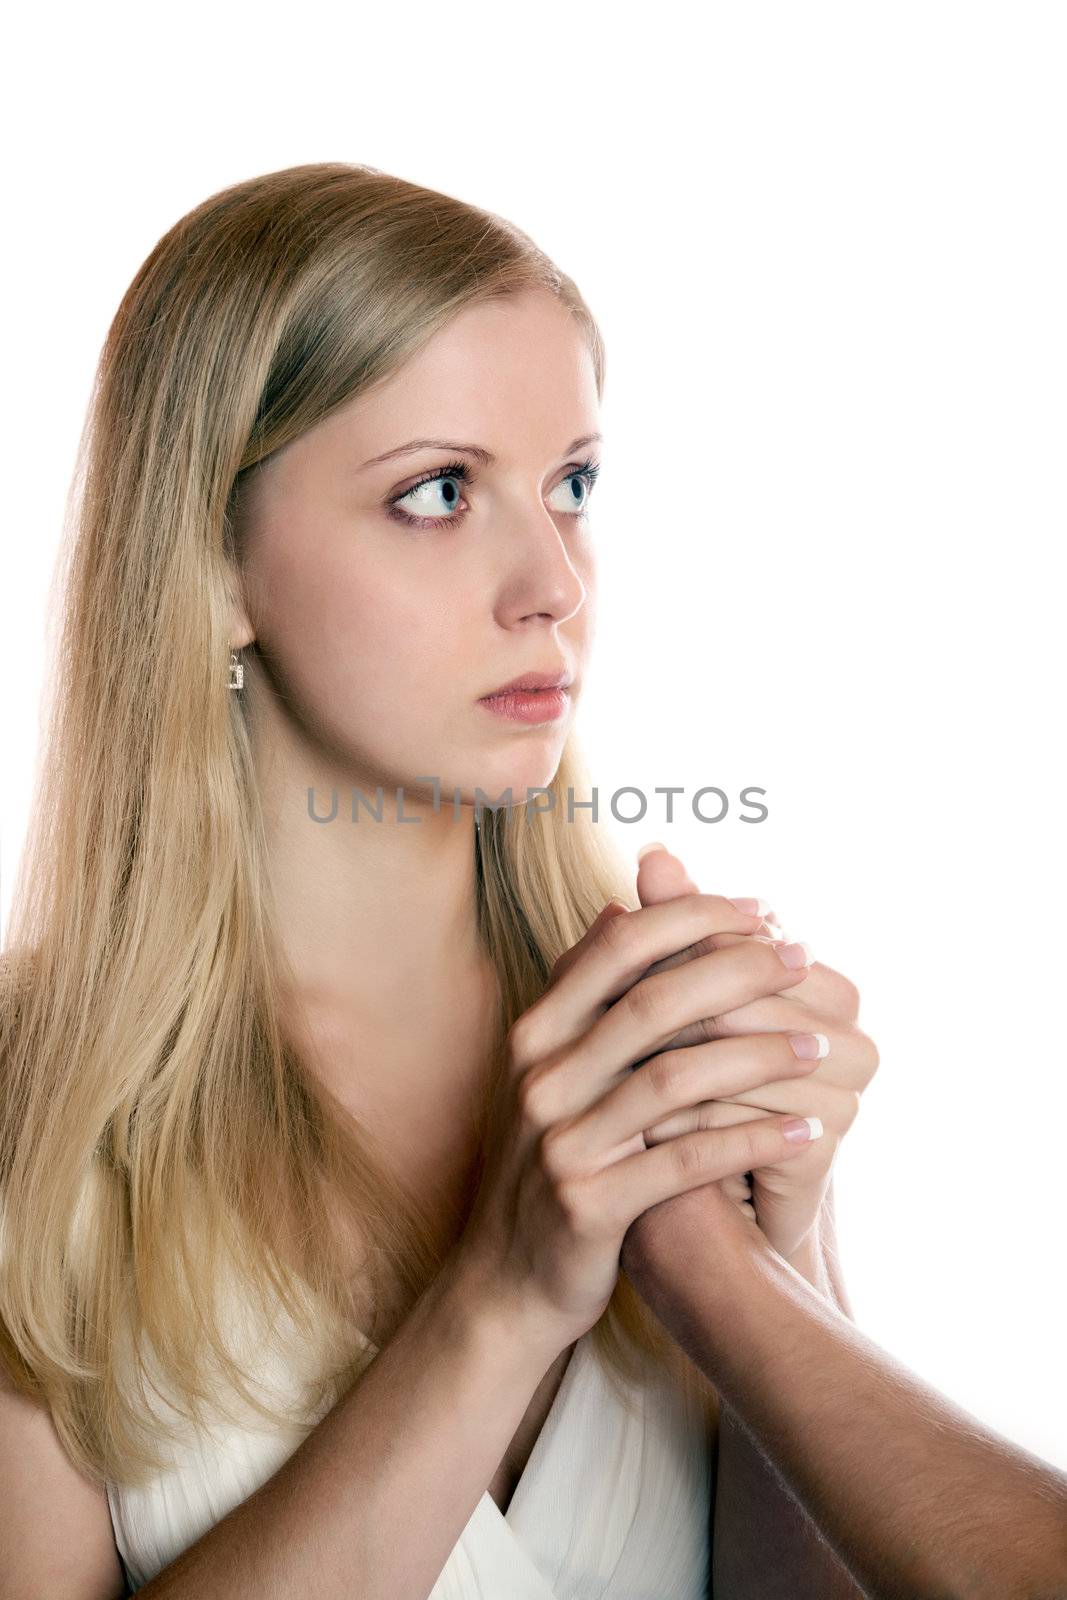 The girl holds two hands a man's hand on  white background